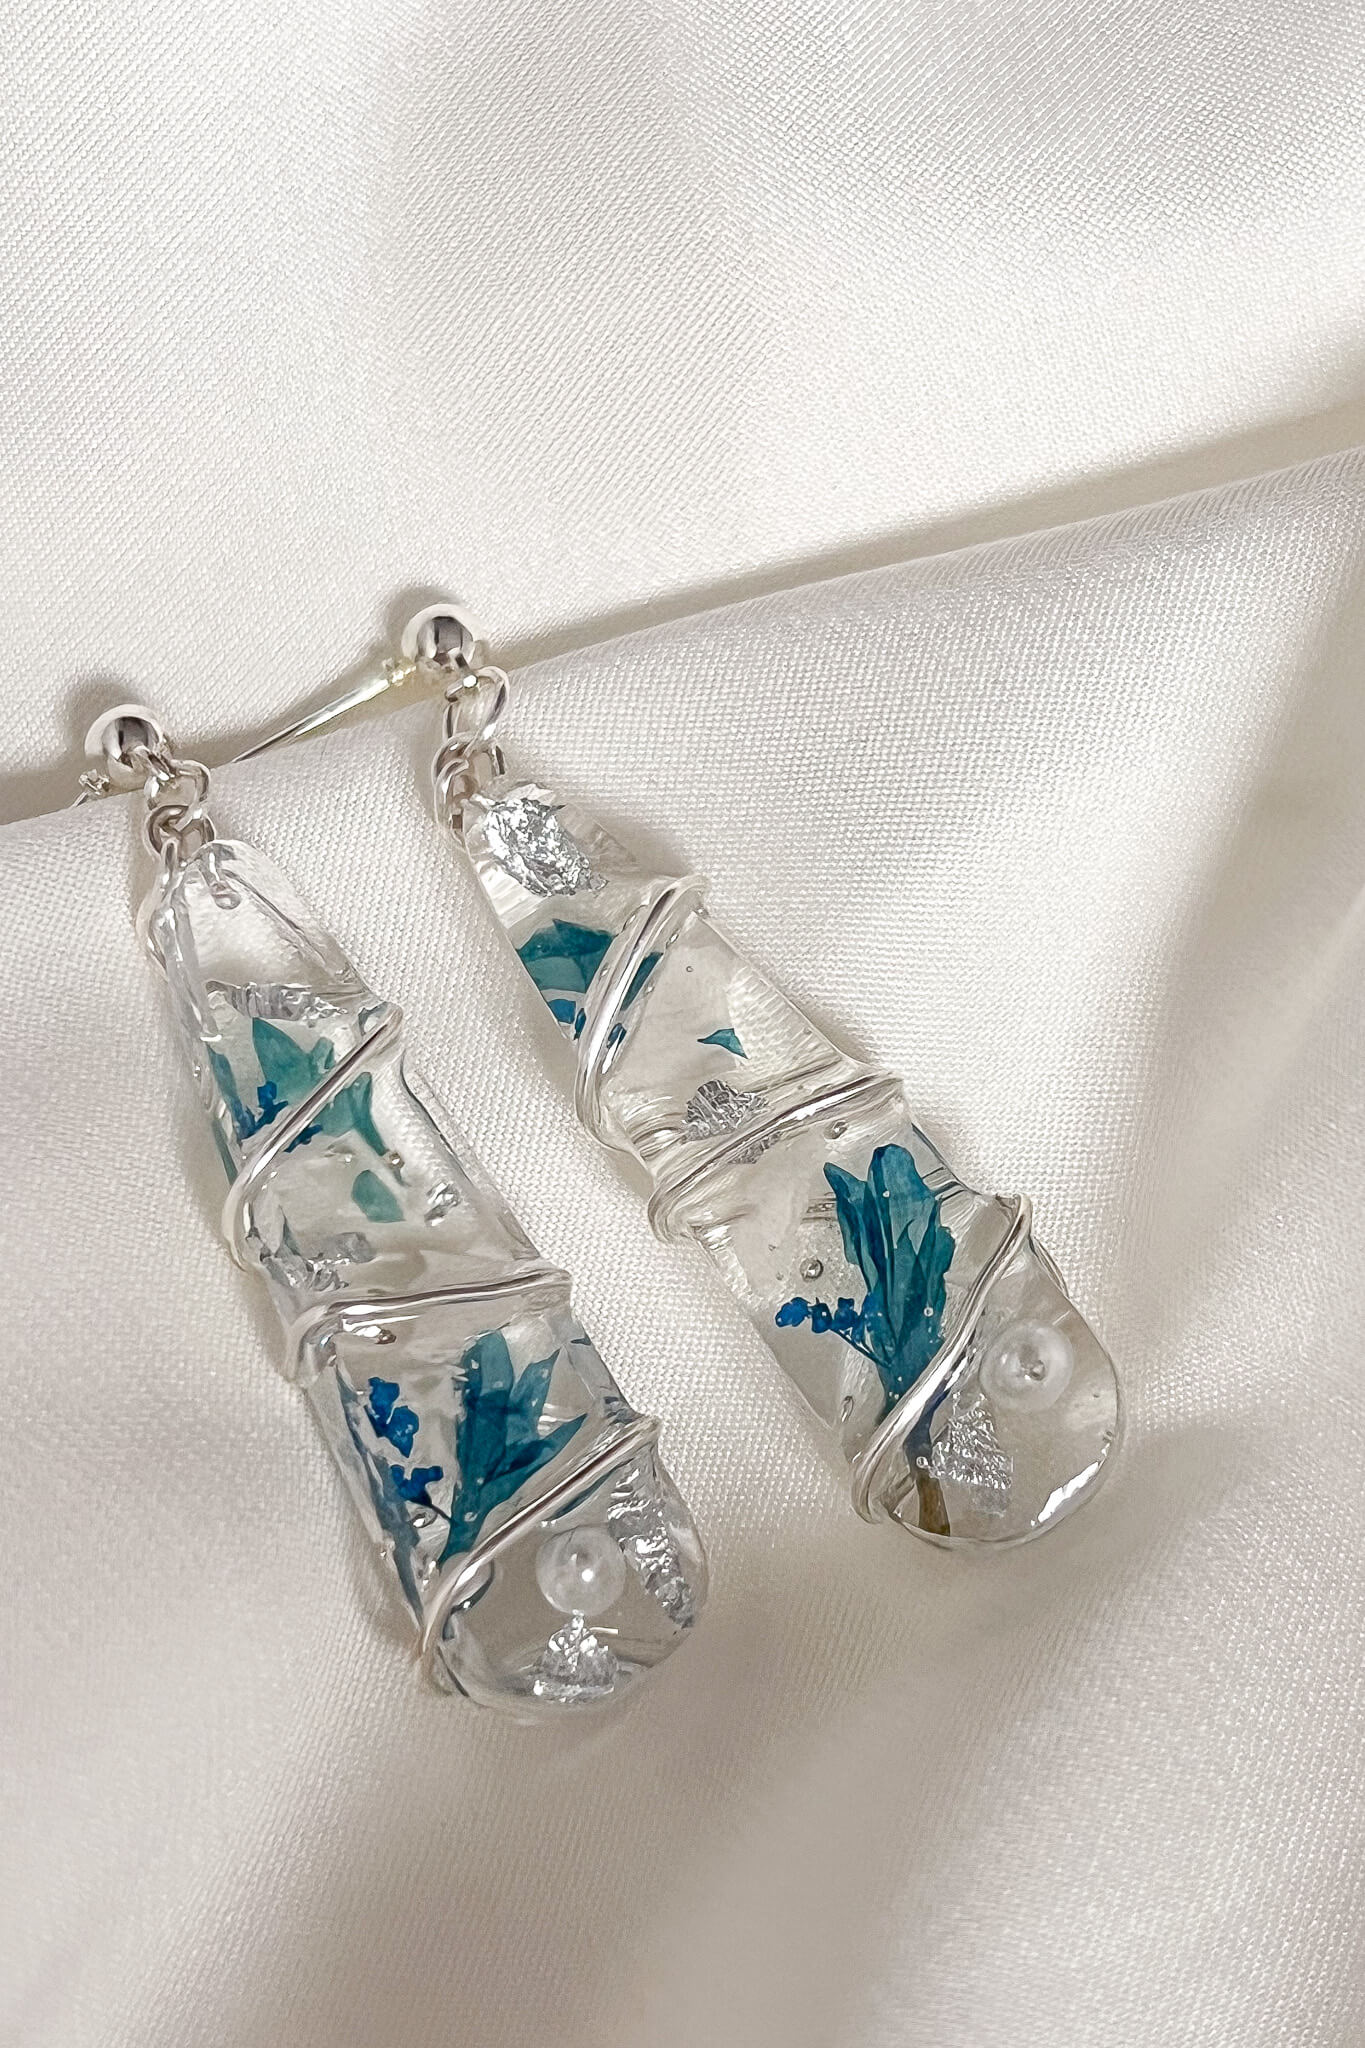 icy look silver dangle earrings - flowers and pearls in resin wrapped with silver jewelry wire